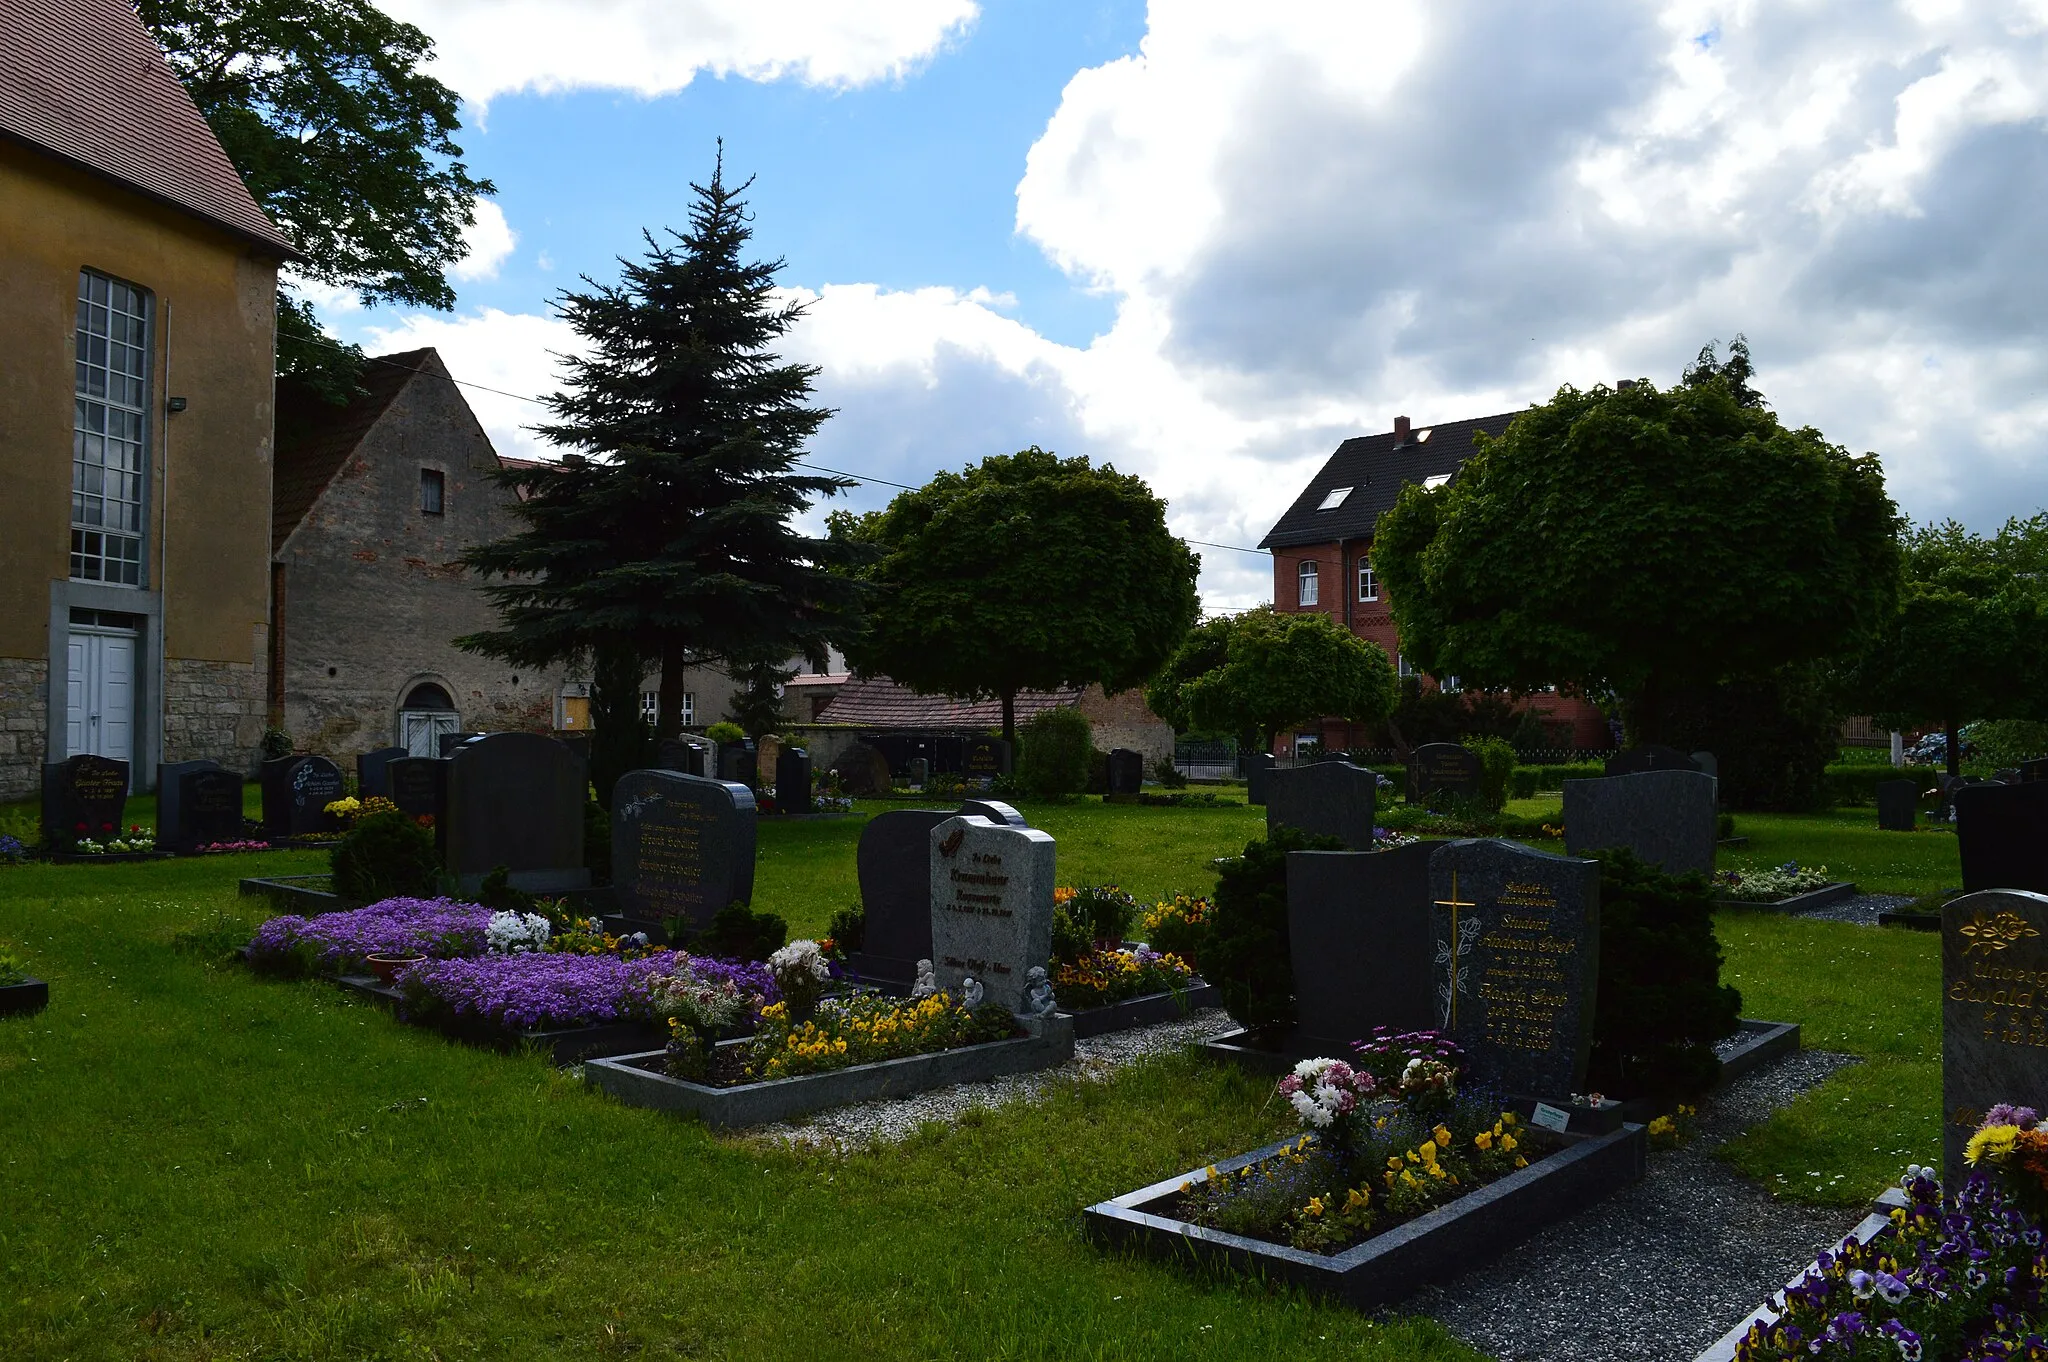 Photo showing: Großaga, Gera, Germany, on Whit Monday 2013: Cemetery